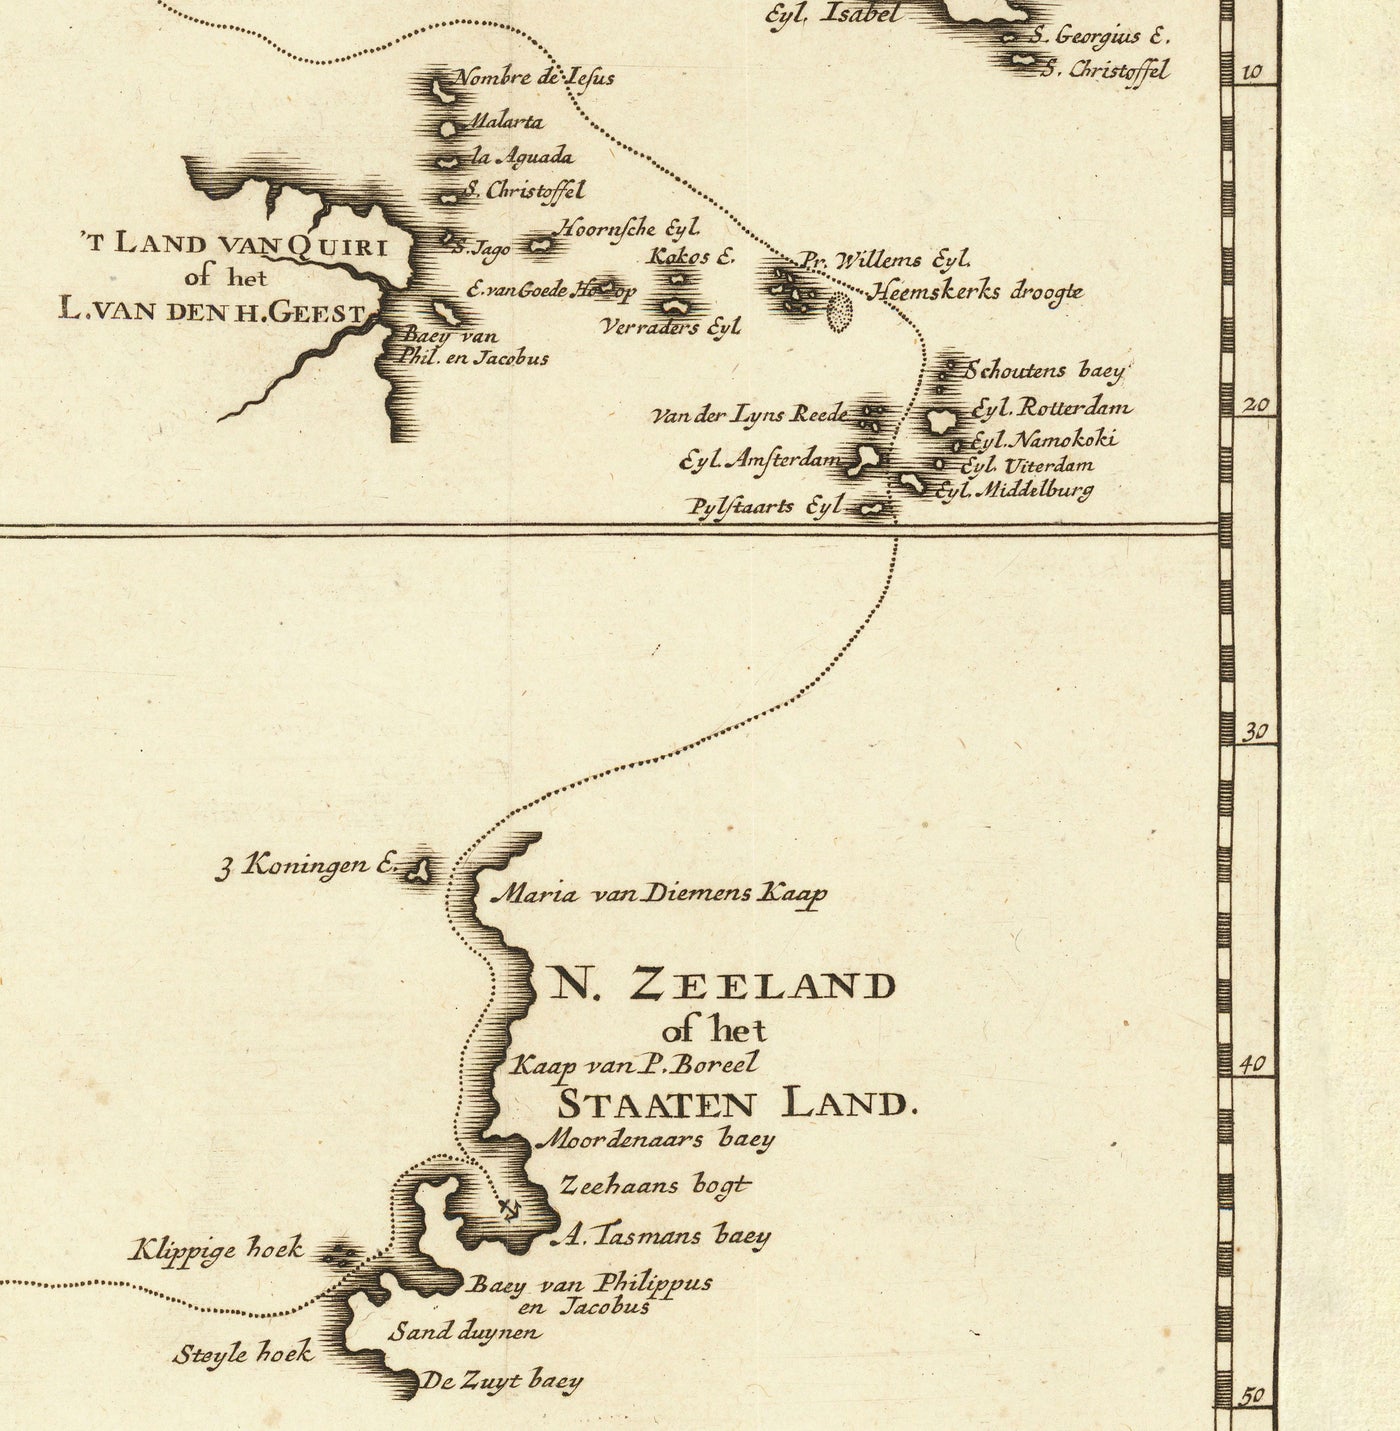 Old Historical Map of New Holland in 1726 by Francois Valentijn - Abel Tasman, Australia, New Zealand, Borneo, New Guinea